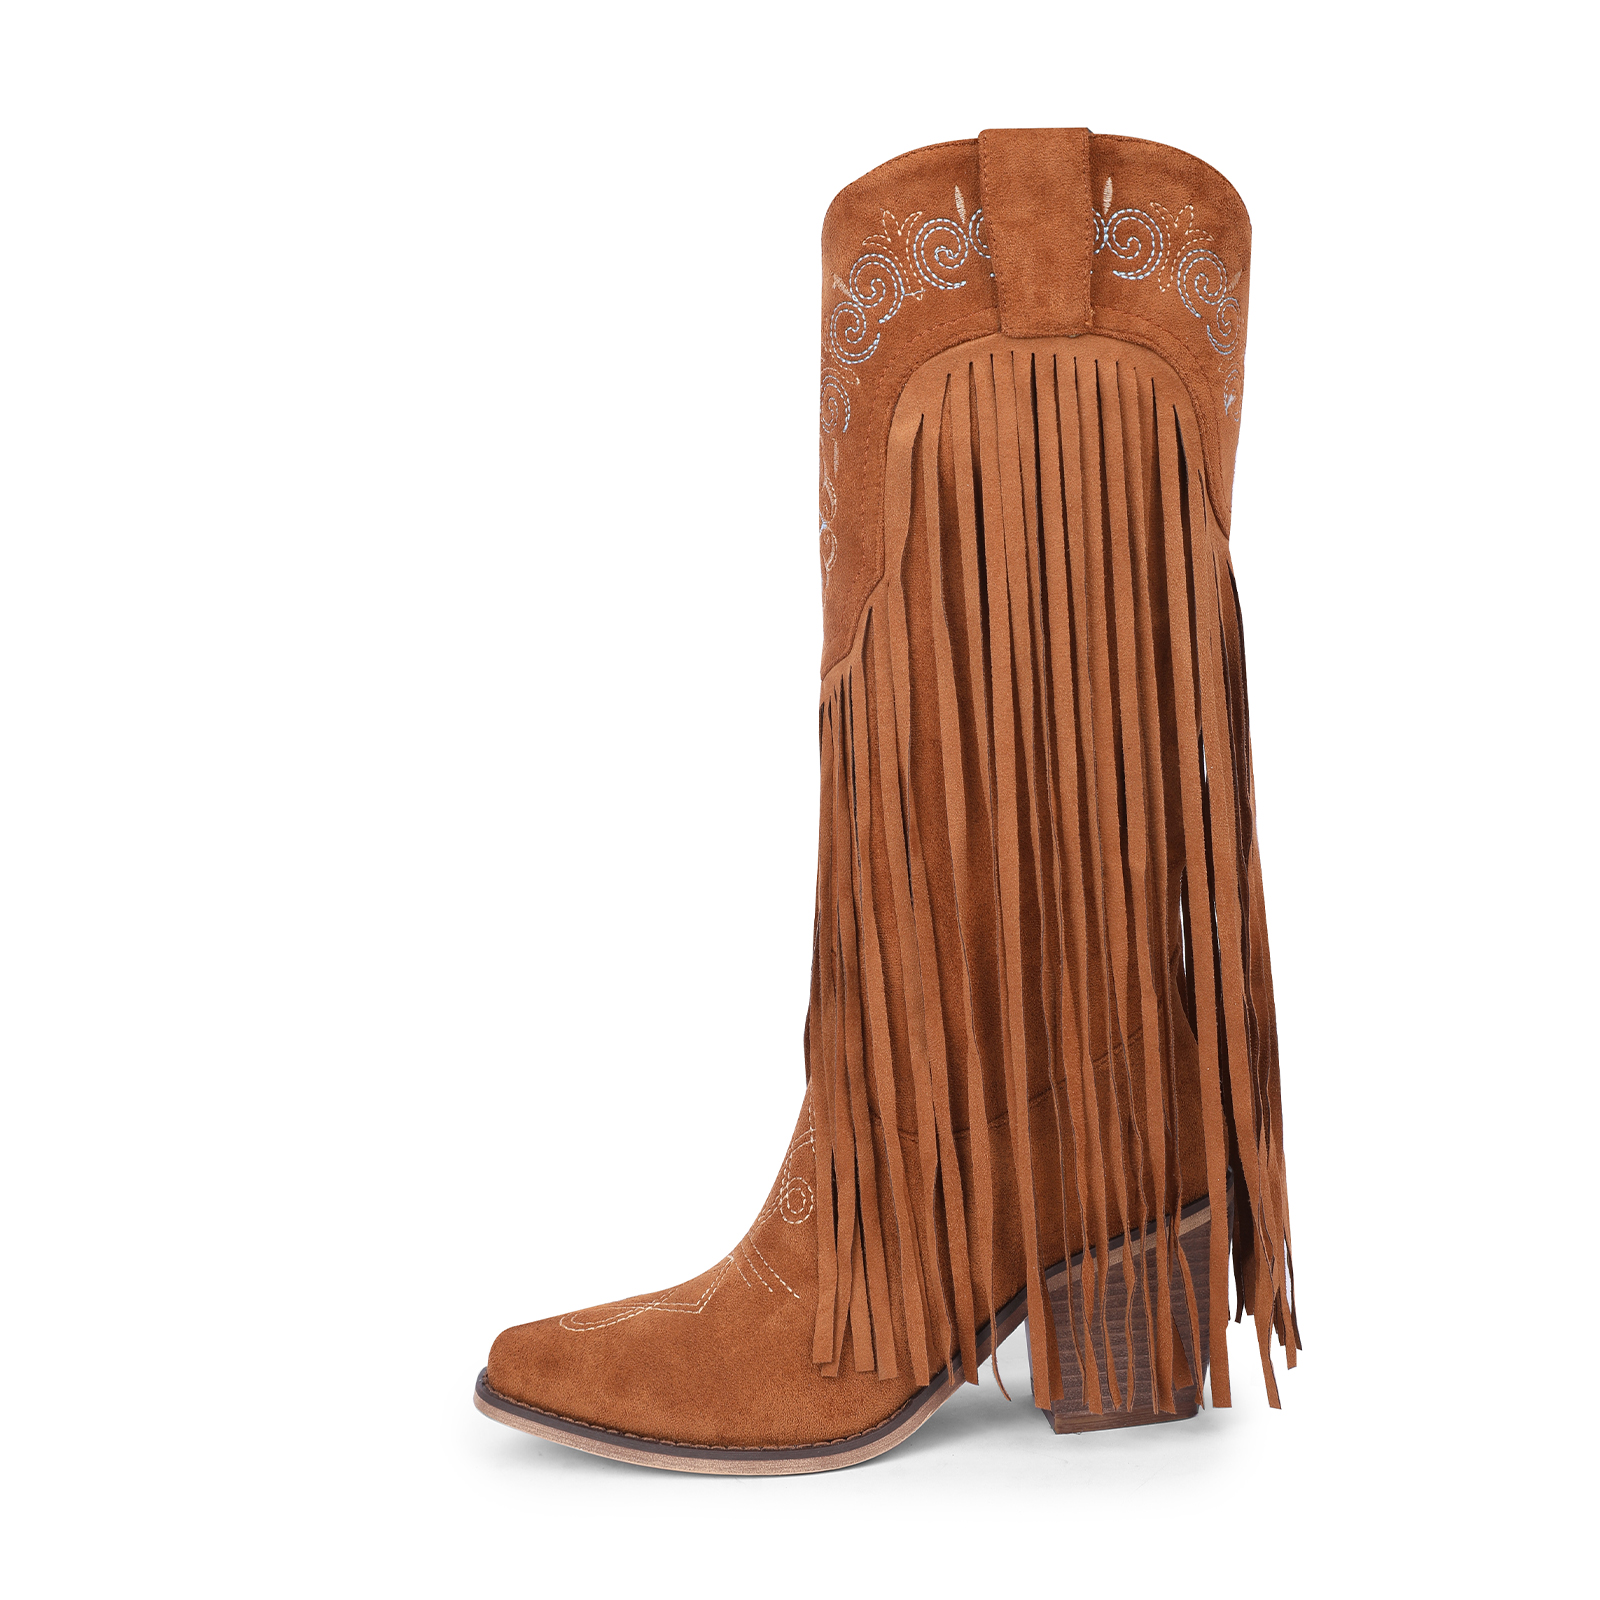 TAAFO Chunky Heel Fancy Pink Knee High Boots Texas Cowgirl Boots Western Long Fringe Cowboy Boots With Tassels